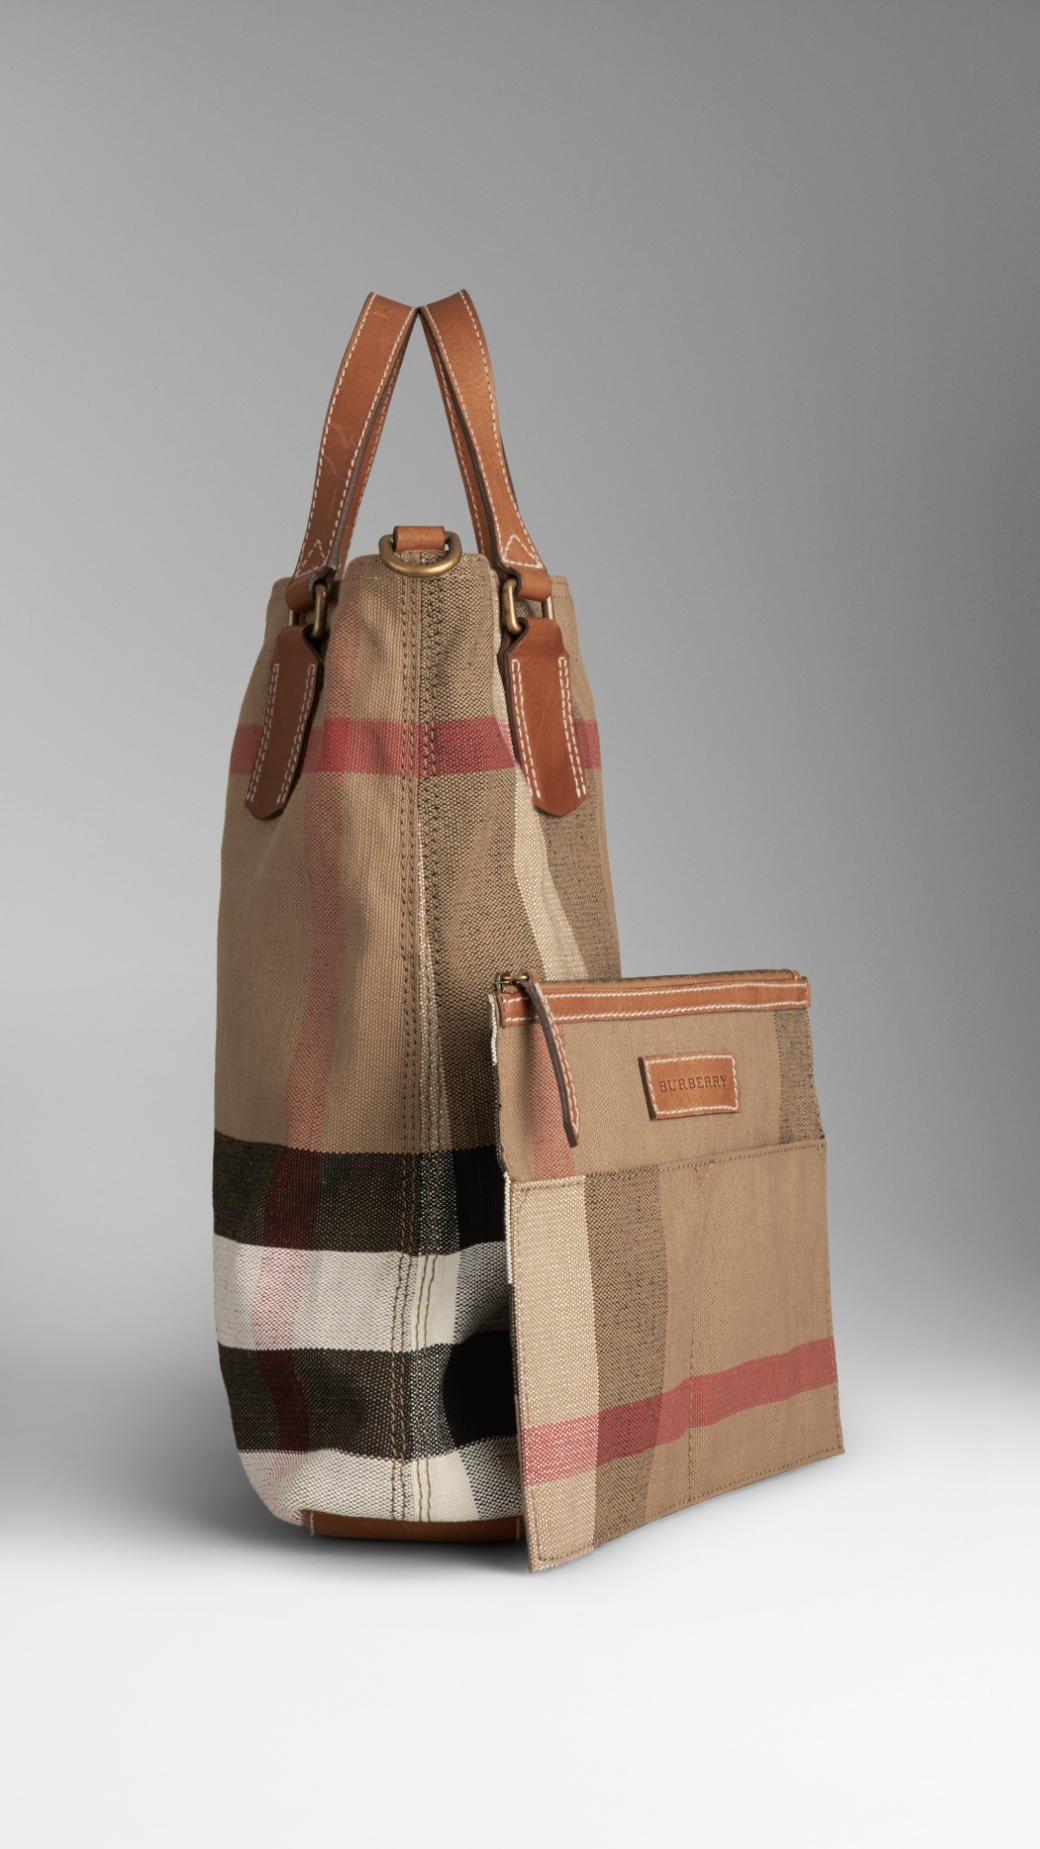 Lyst - Burberry Medium Canvas Check Tote Bag in Brown